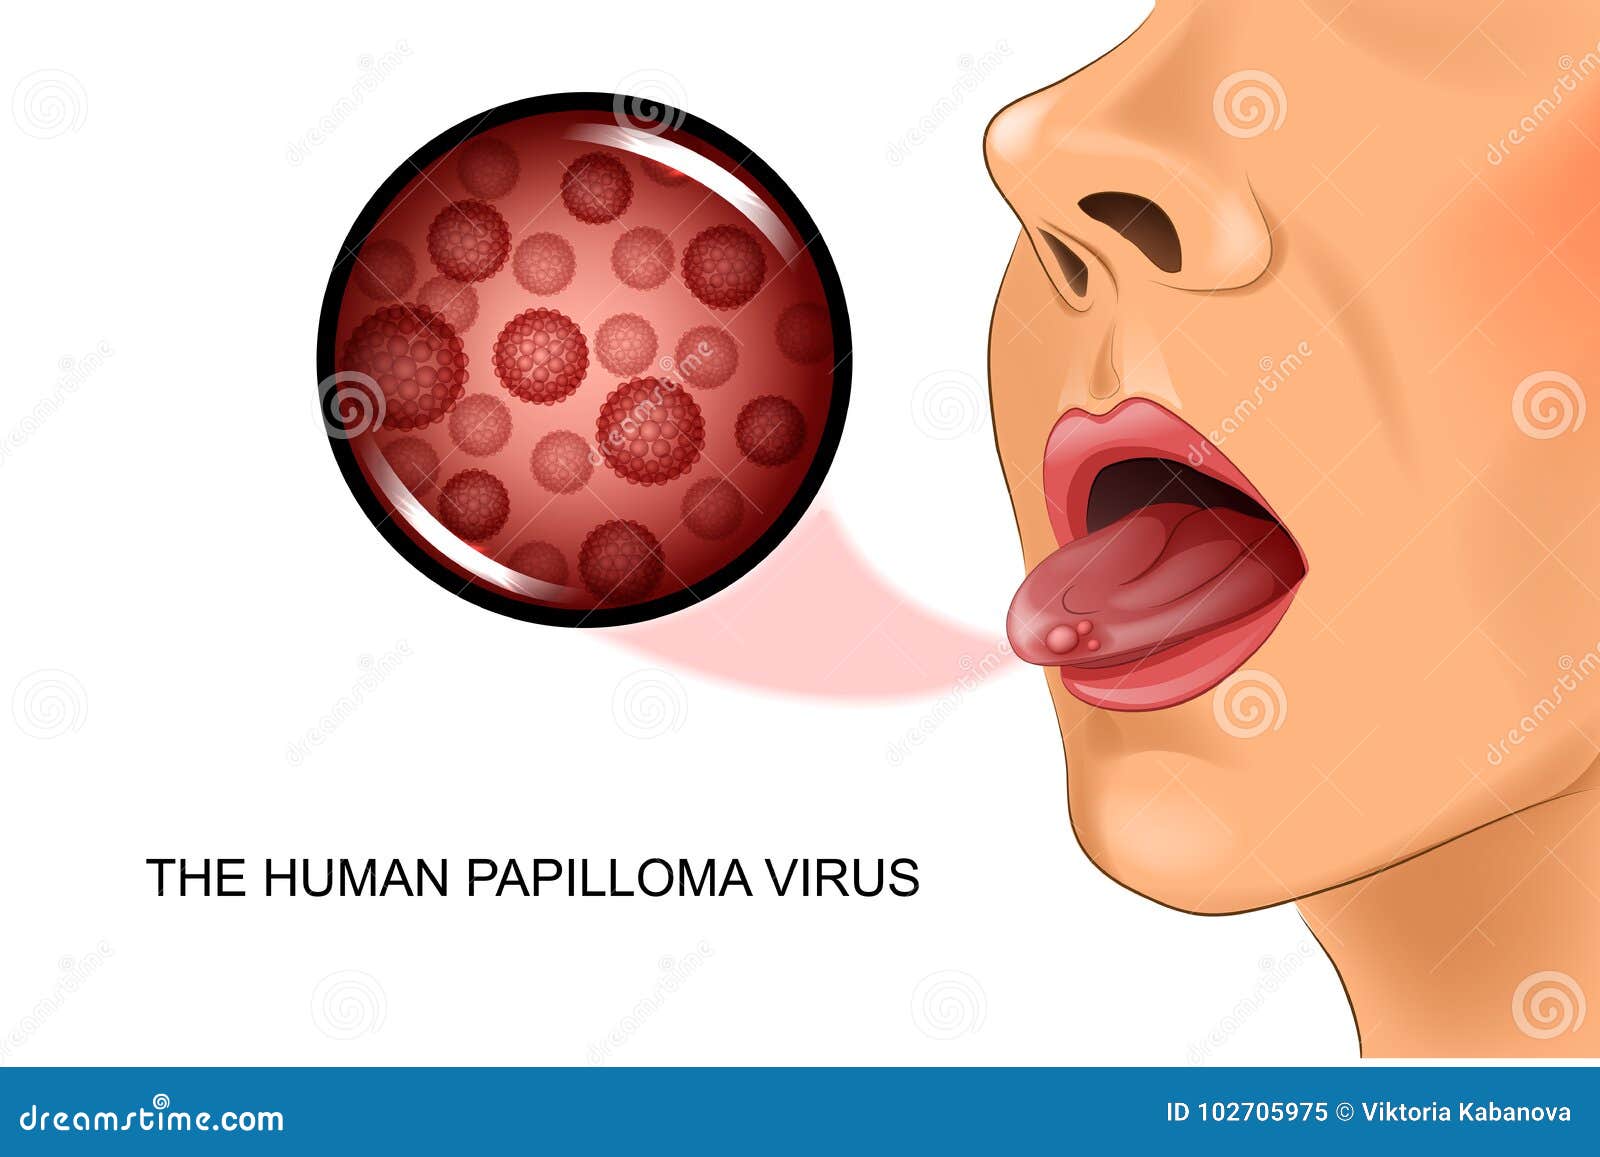 hpv in the tongue